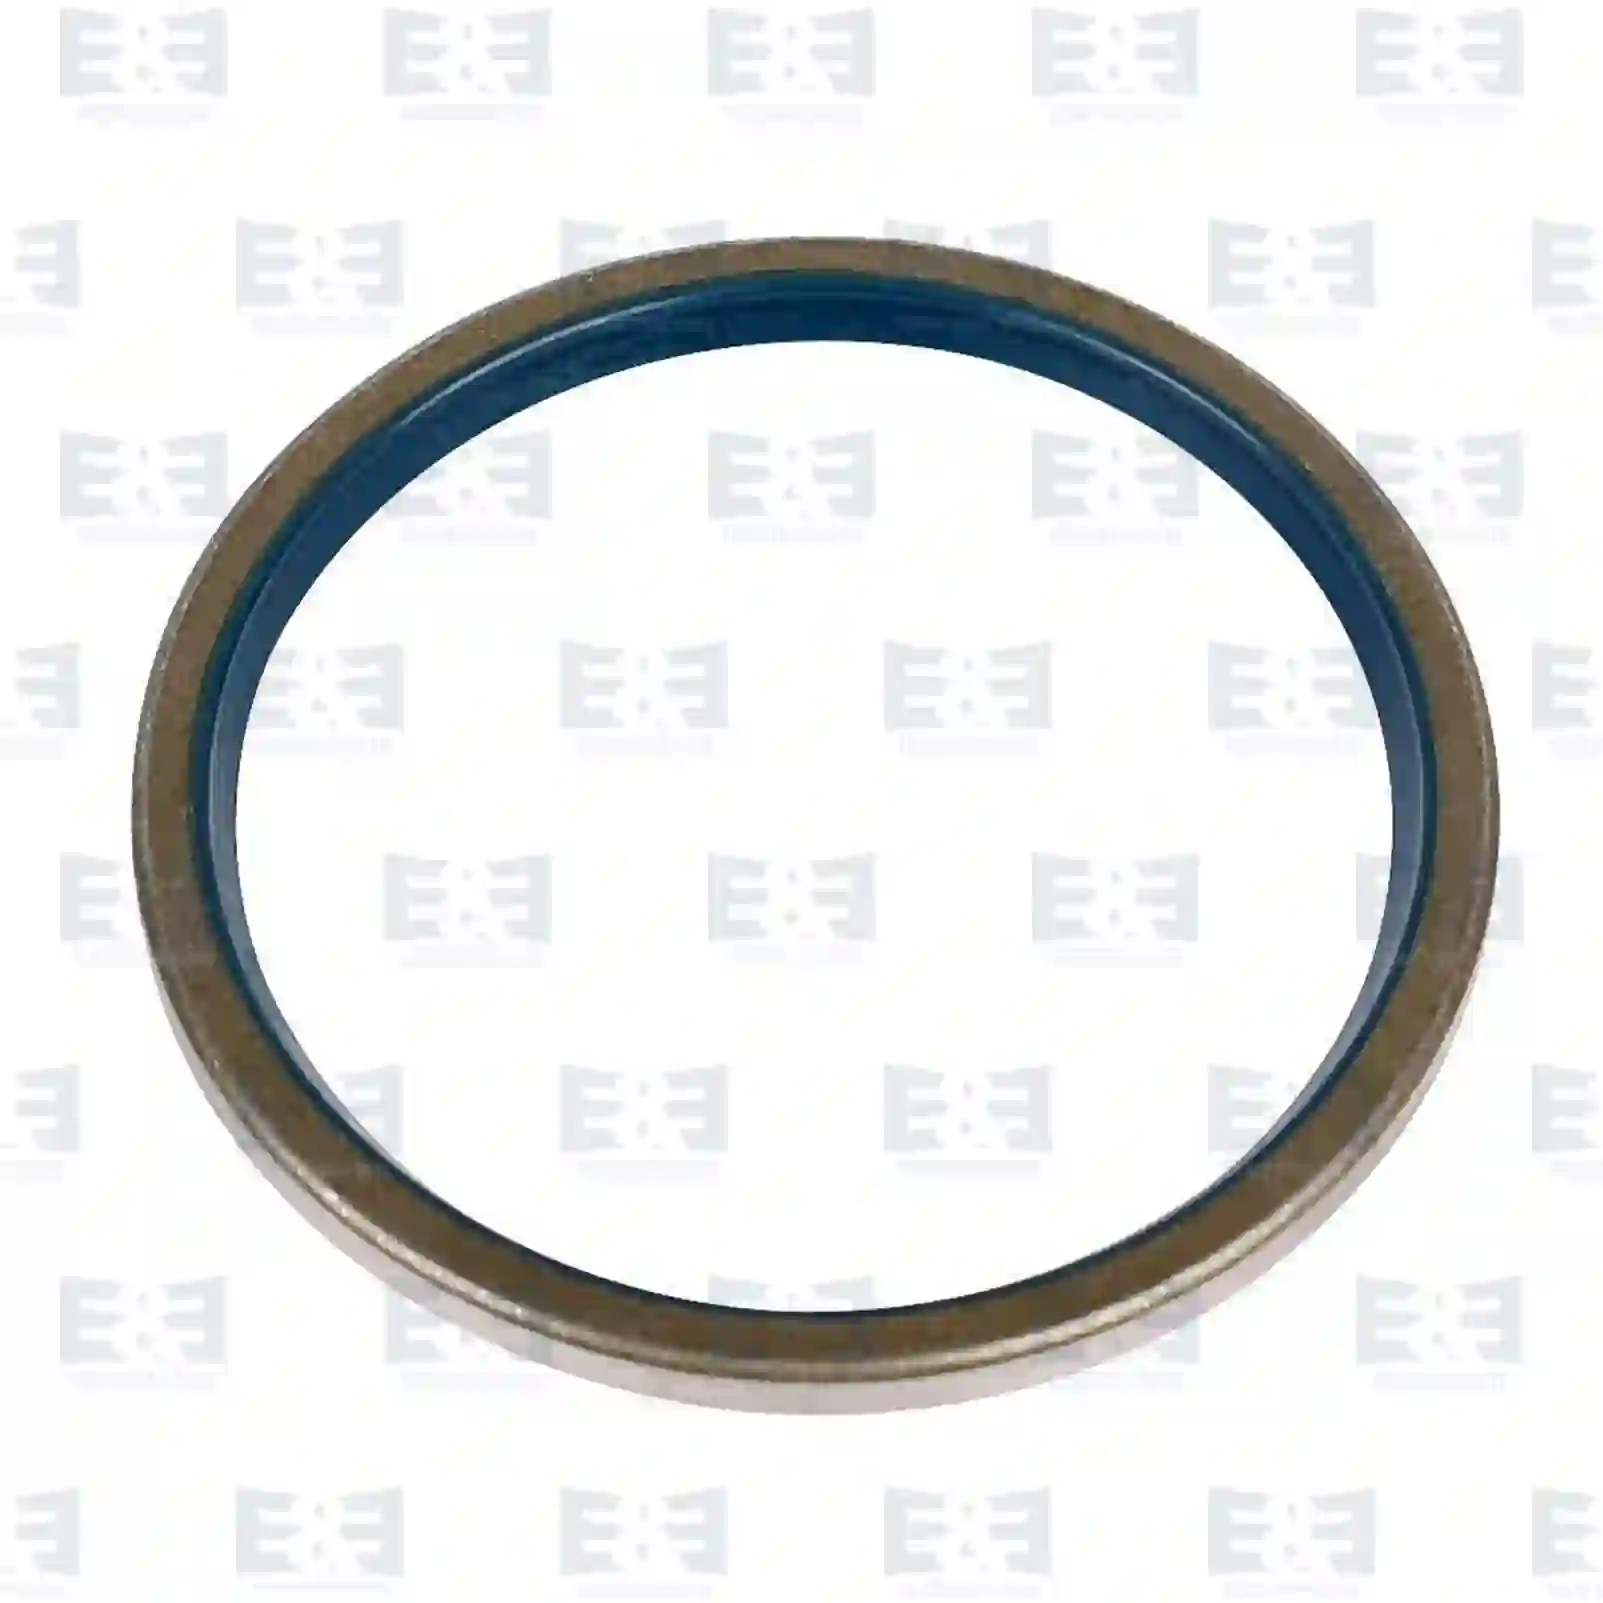 Steering Knuckle Oil seal, EE No 2E2270407 ,  oem no:06562790076, 06562790077, 06562790220, 06562790222, 06562790273, 06562790274, 06562790353, 81965010749, 0109974146, 0109975246, 0119973546, 080160118, 082135823 E&E Truck Spare Parts | Truck Spare Parts, Auotomotive Spare Parts